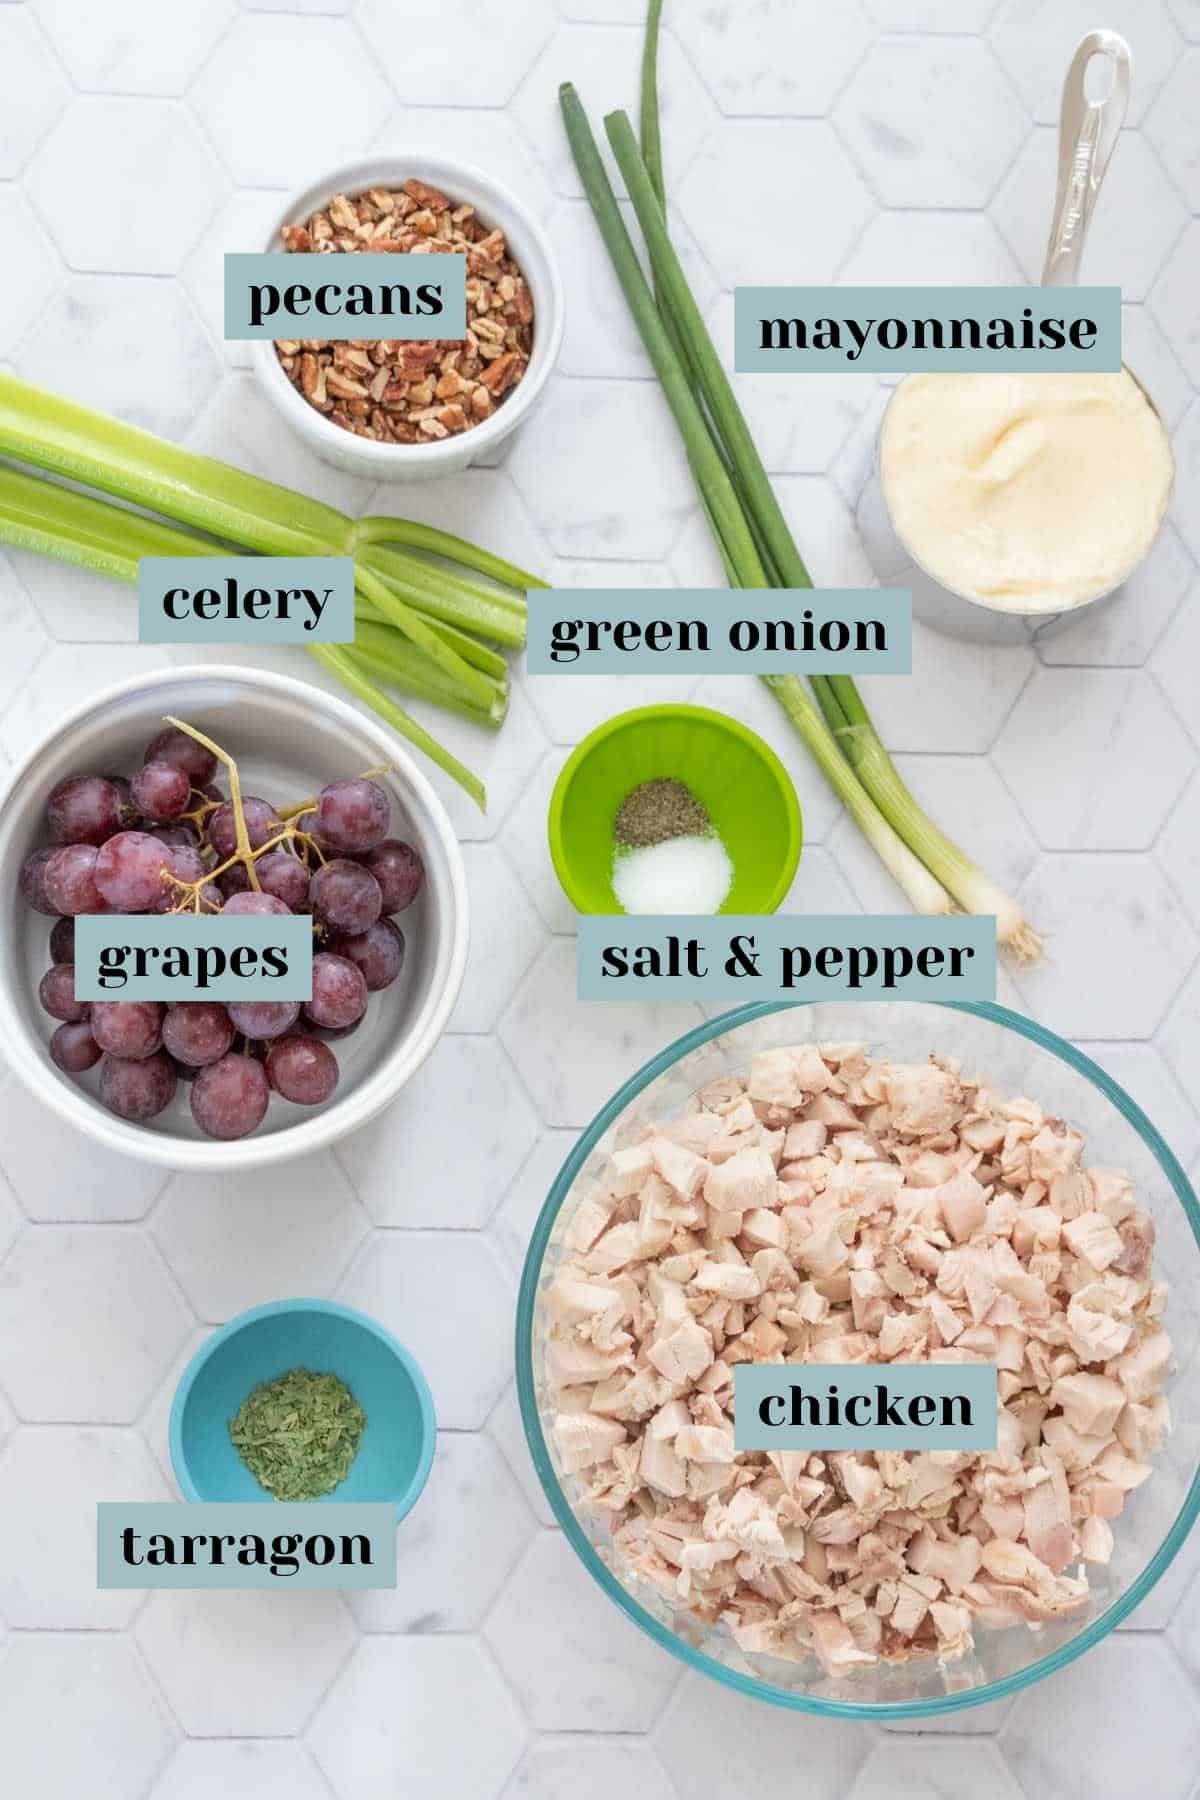 Ingredients for chicken salad on a tile surface with labels.